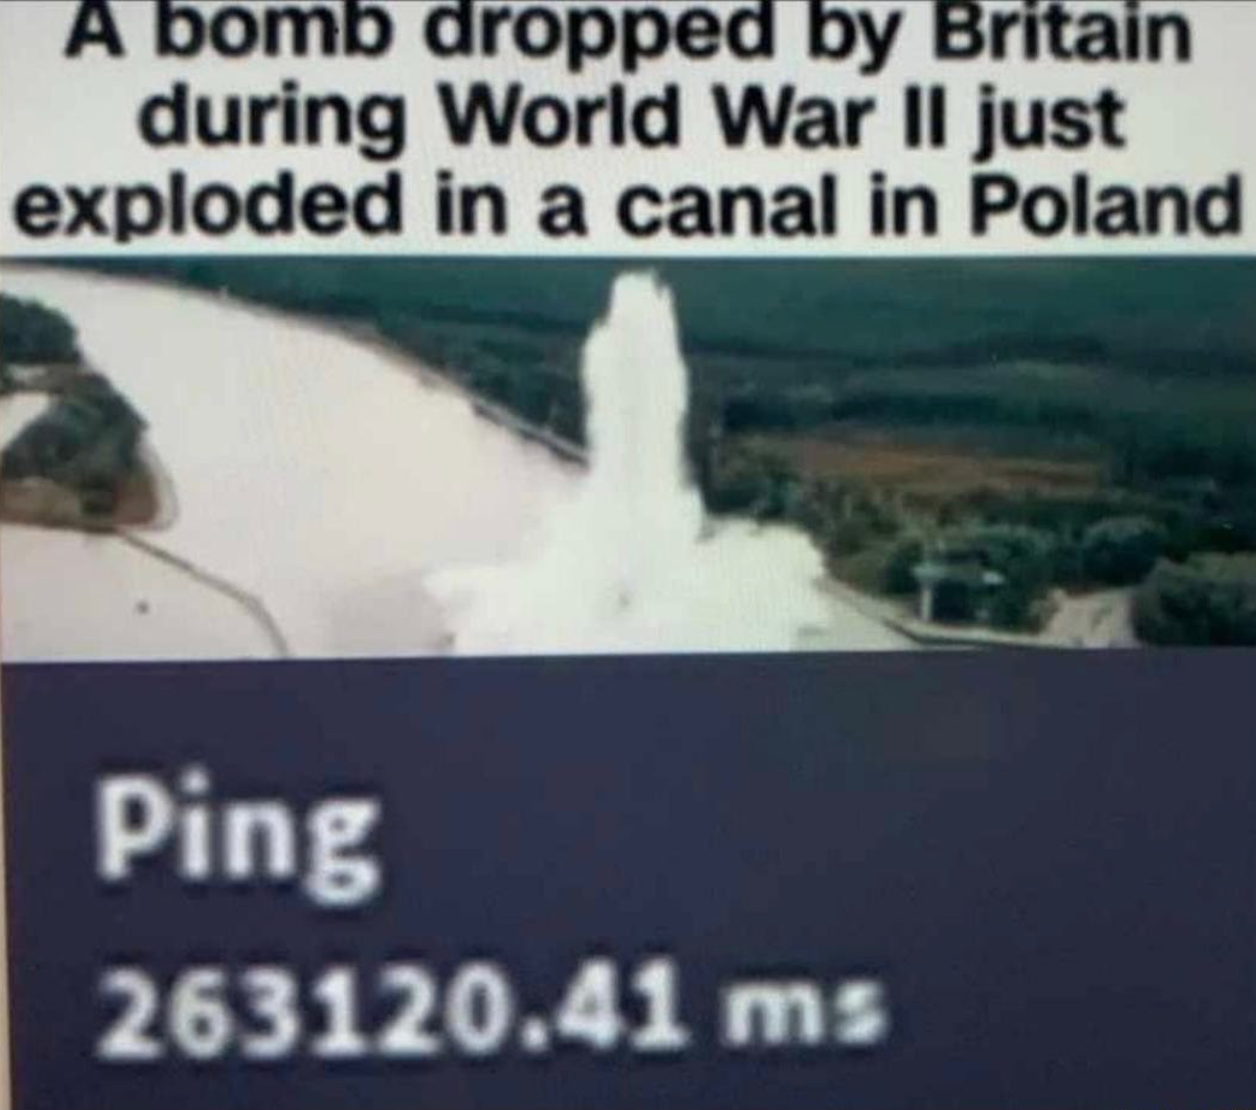 funny gaming memes - rp data - A bomb dropped by Britain during World War Ii just exploded in a canal in Poland Ping 263120.41 ms